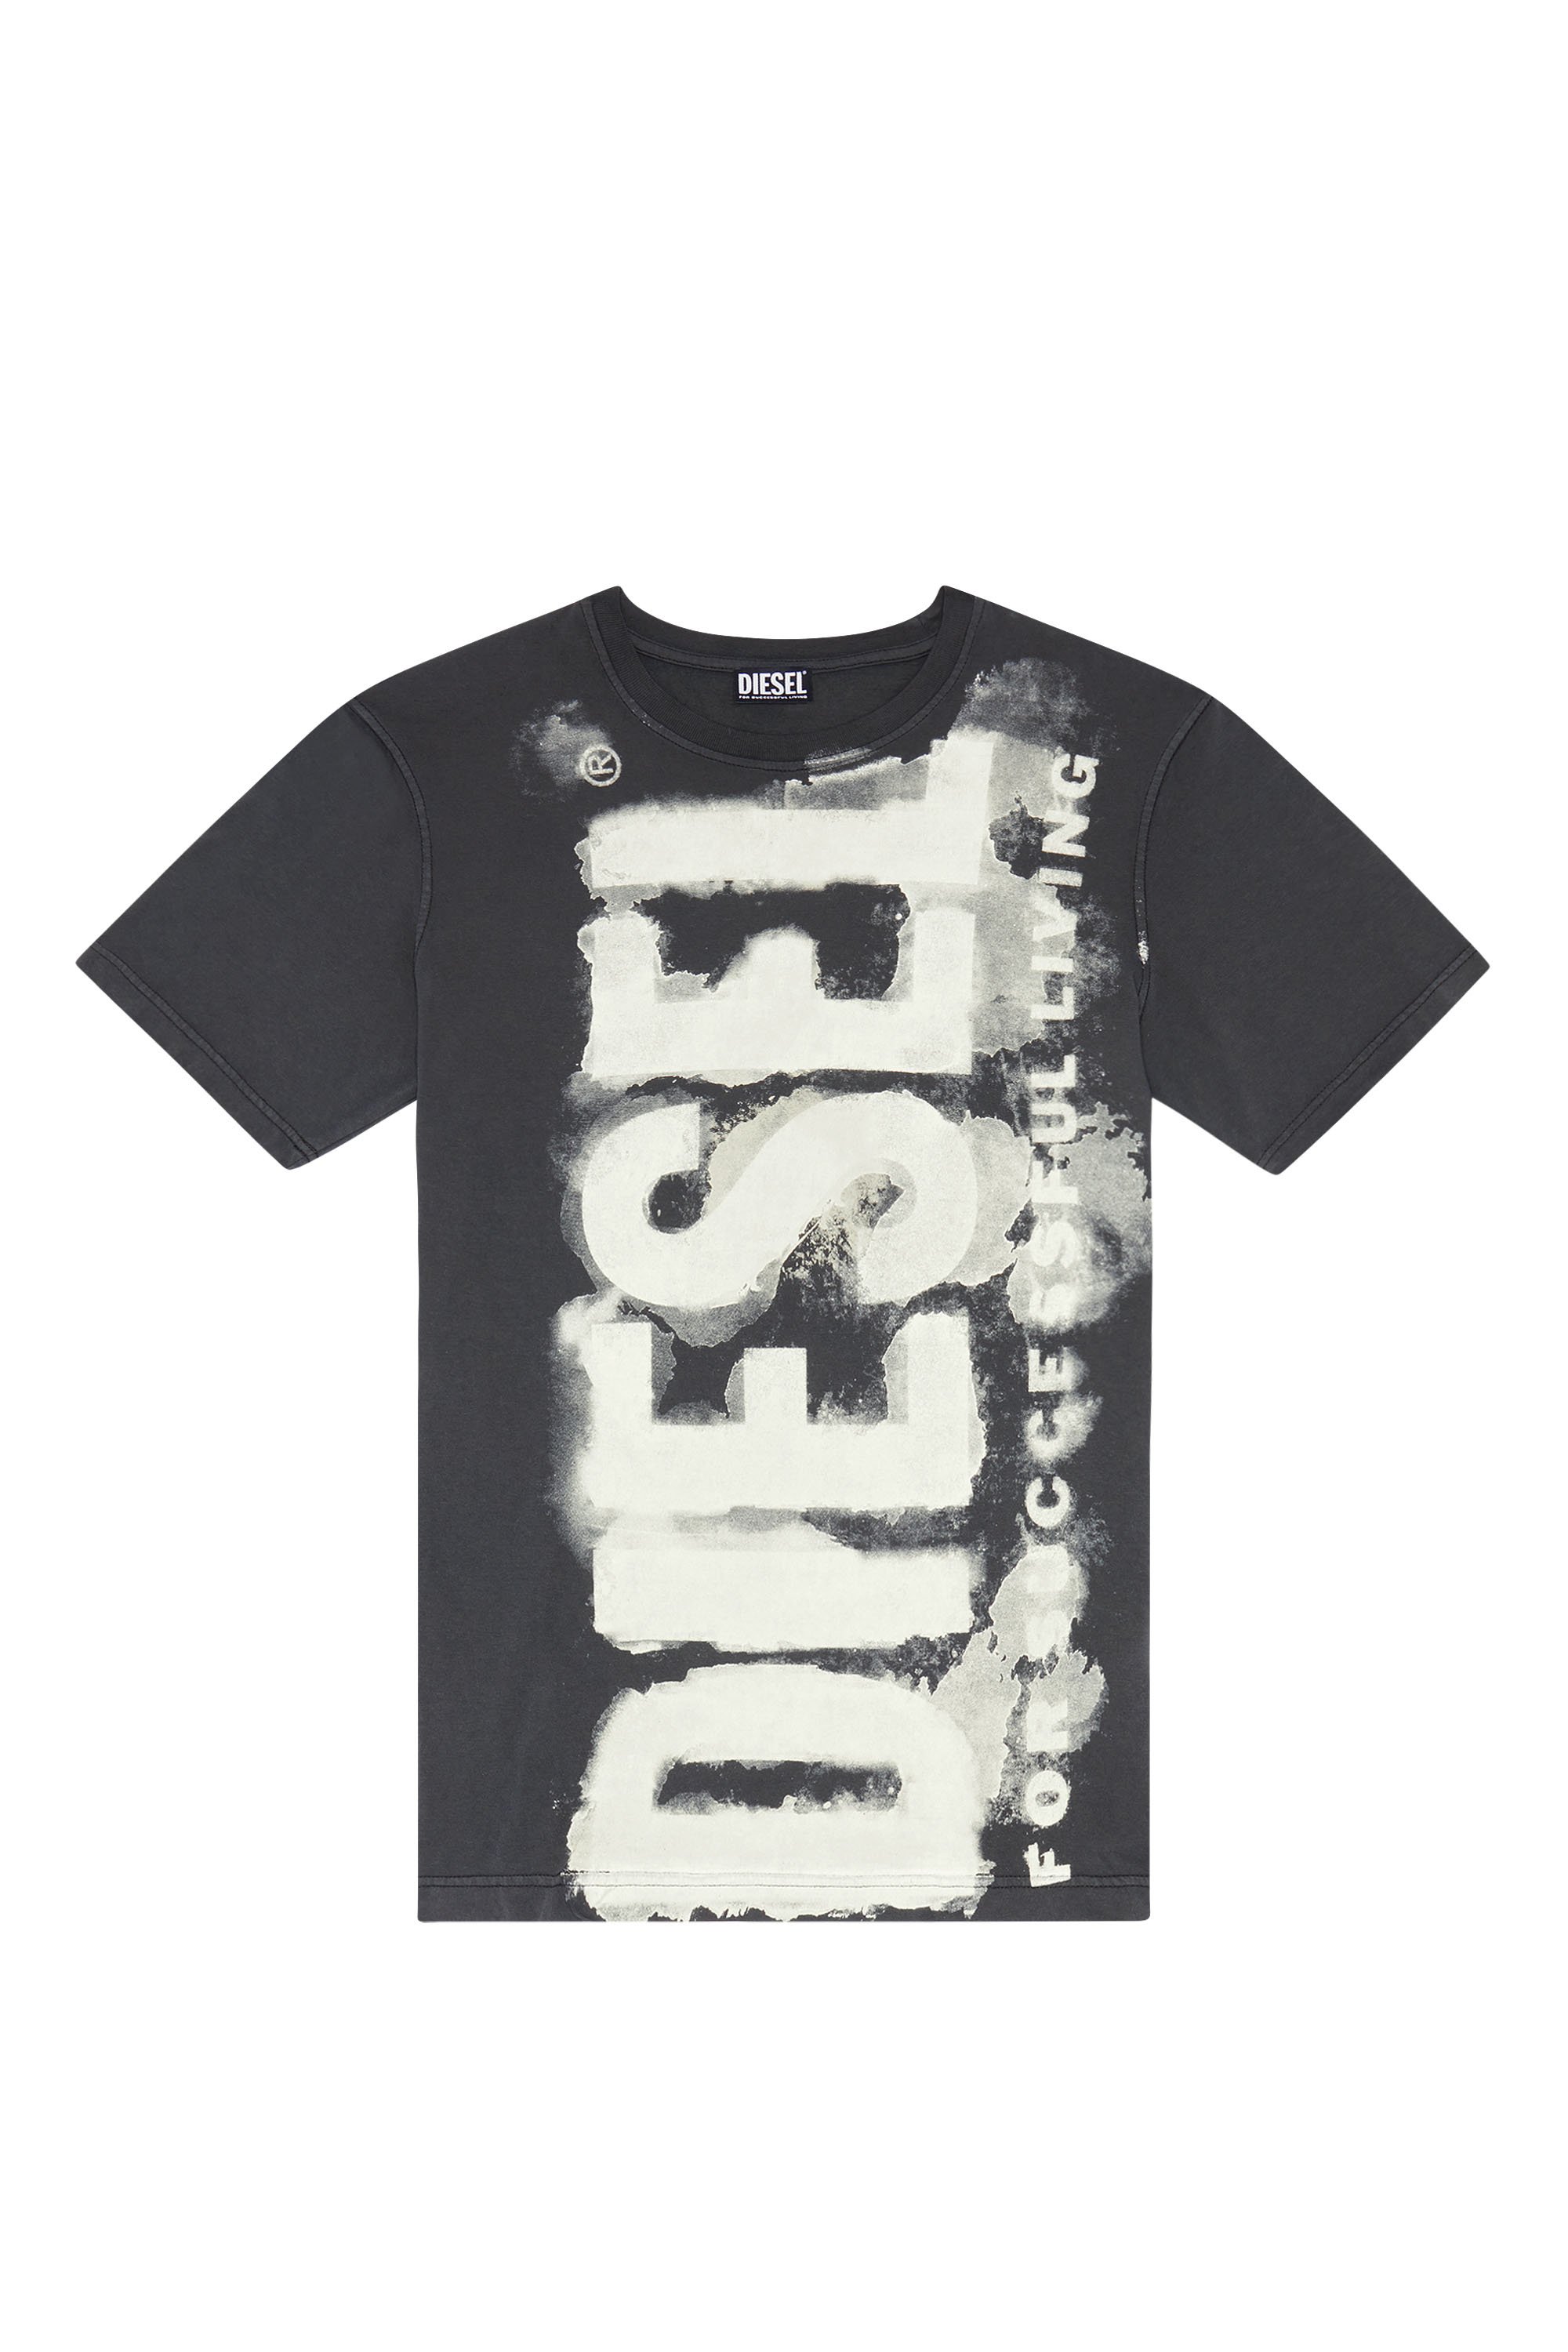 Diesel - T-JUST-E16, Gris oscuro - Image 6